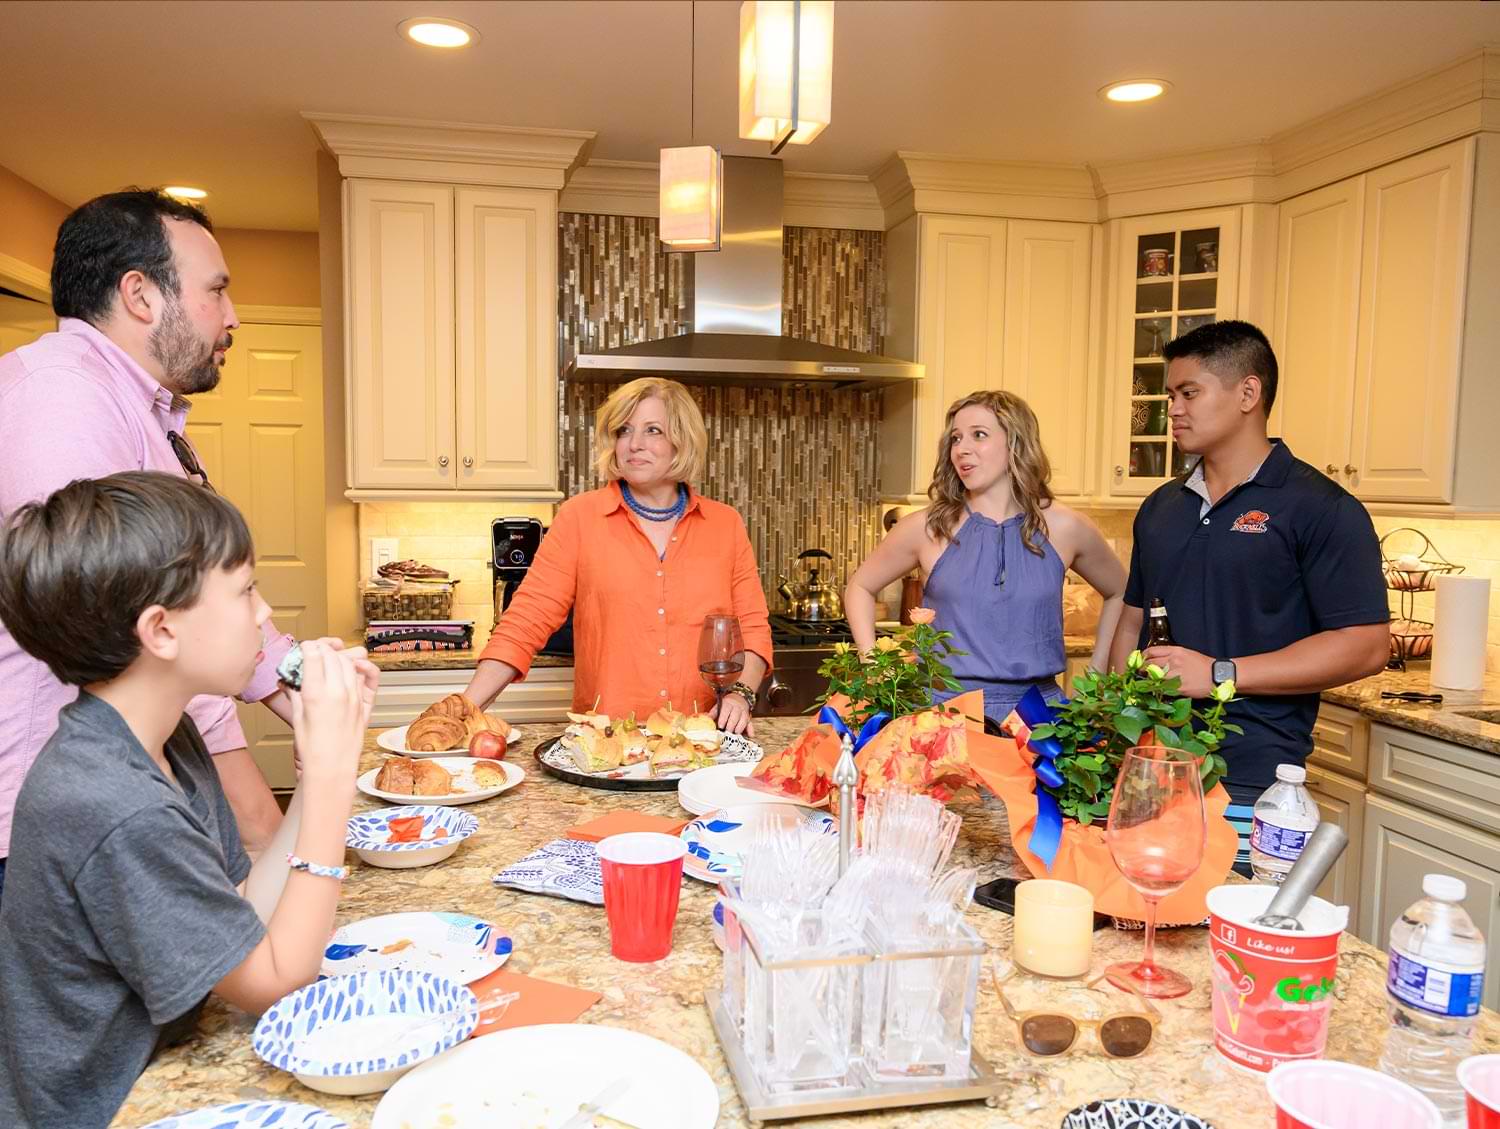 Peter Gale and son Preston with Susan Agostini, Danielle Agostini Gorospe and her husband, King Gorospe stand together in a home kitchen mingling over food